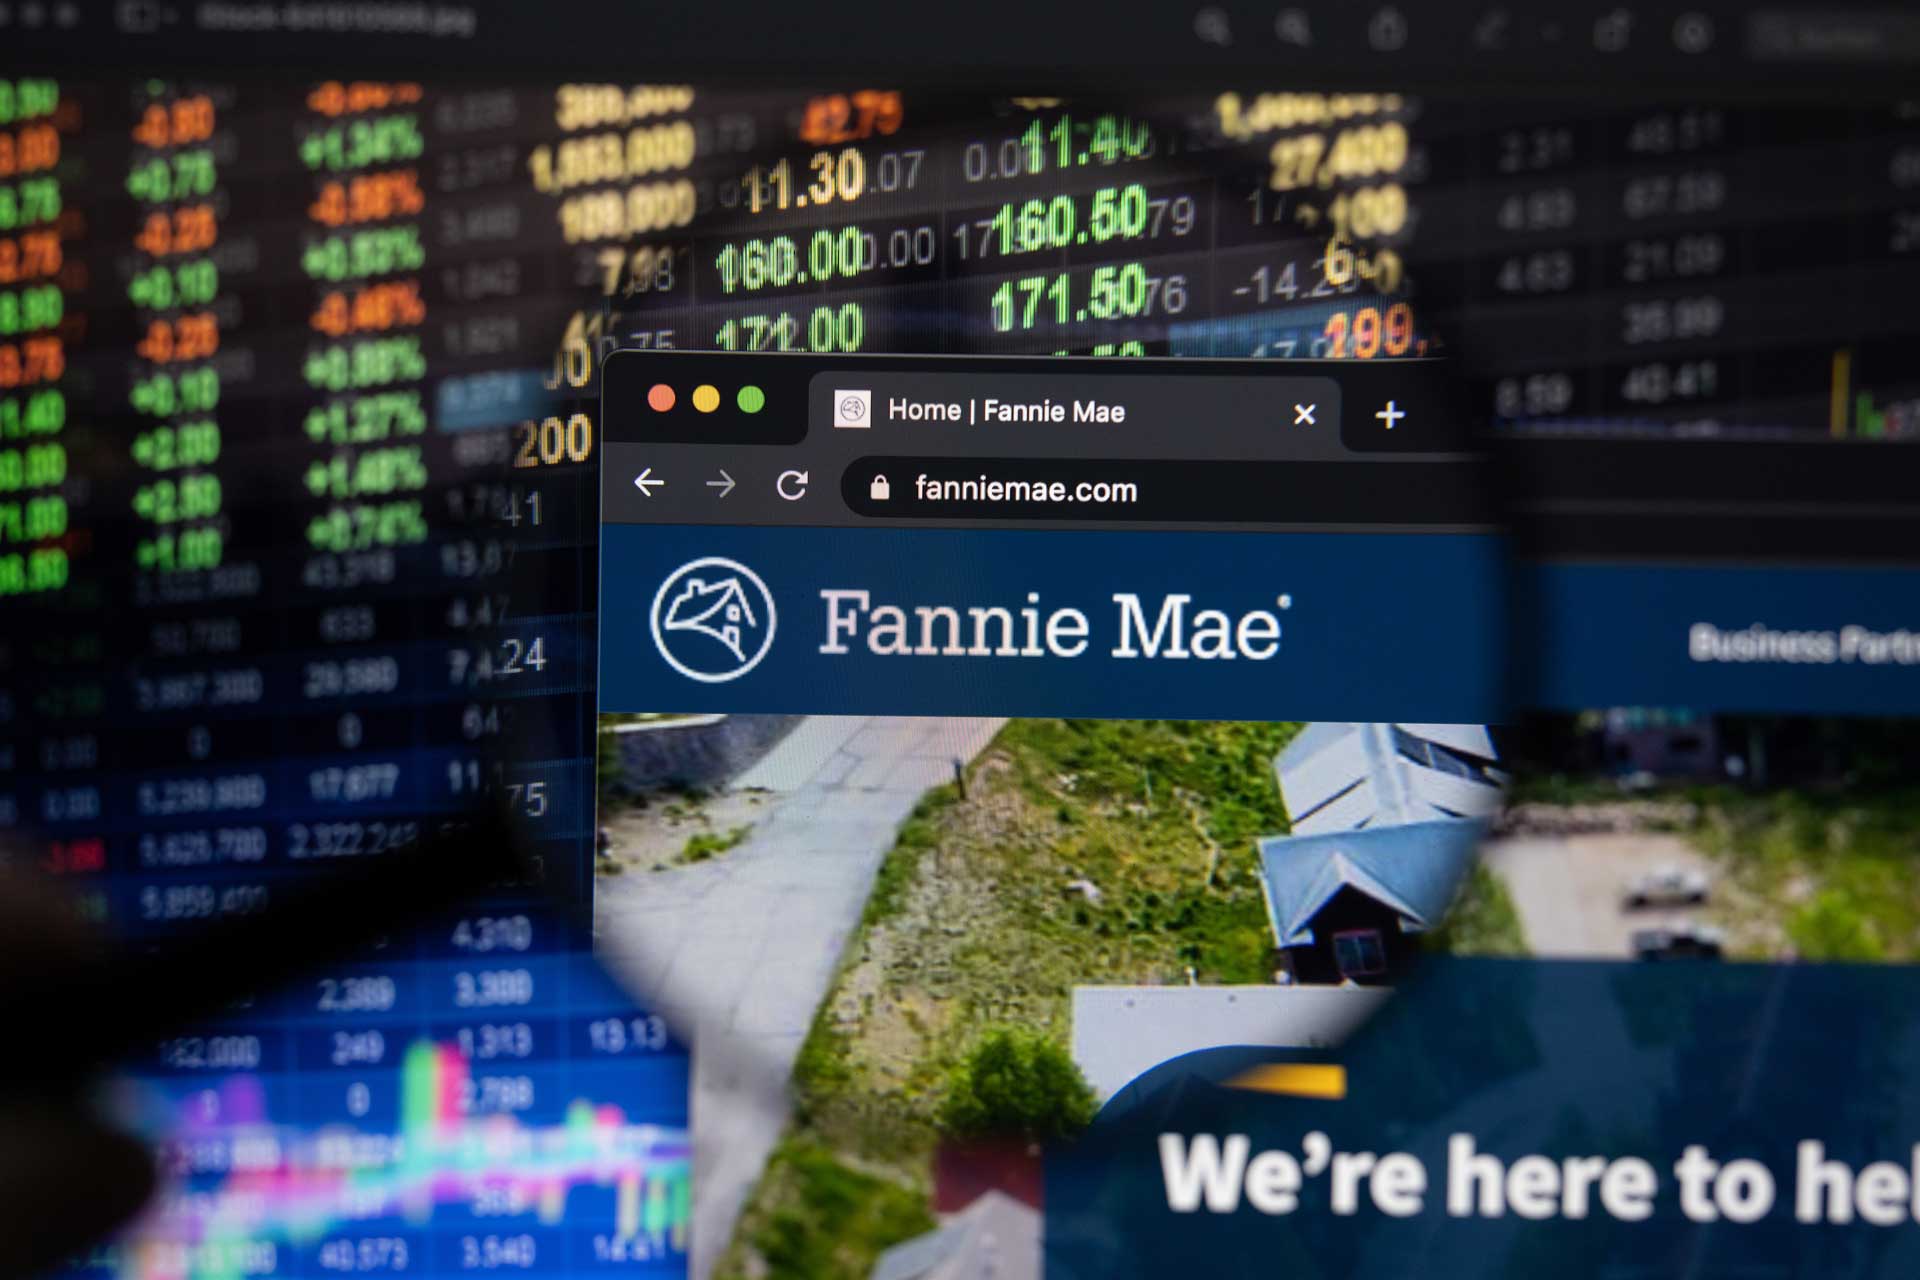 Fannie Mae Lending for Condos and Why FNMA Approval Matters